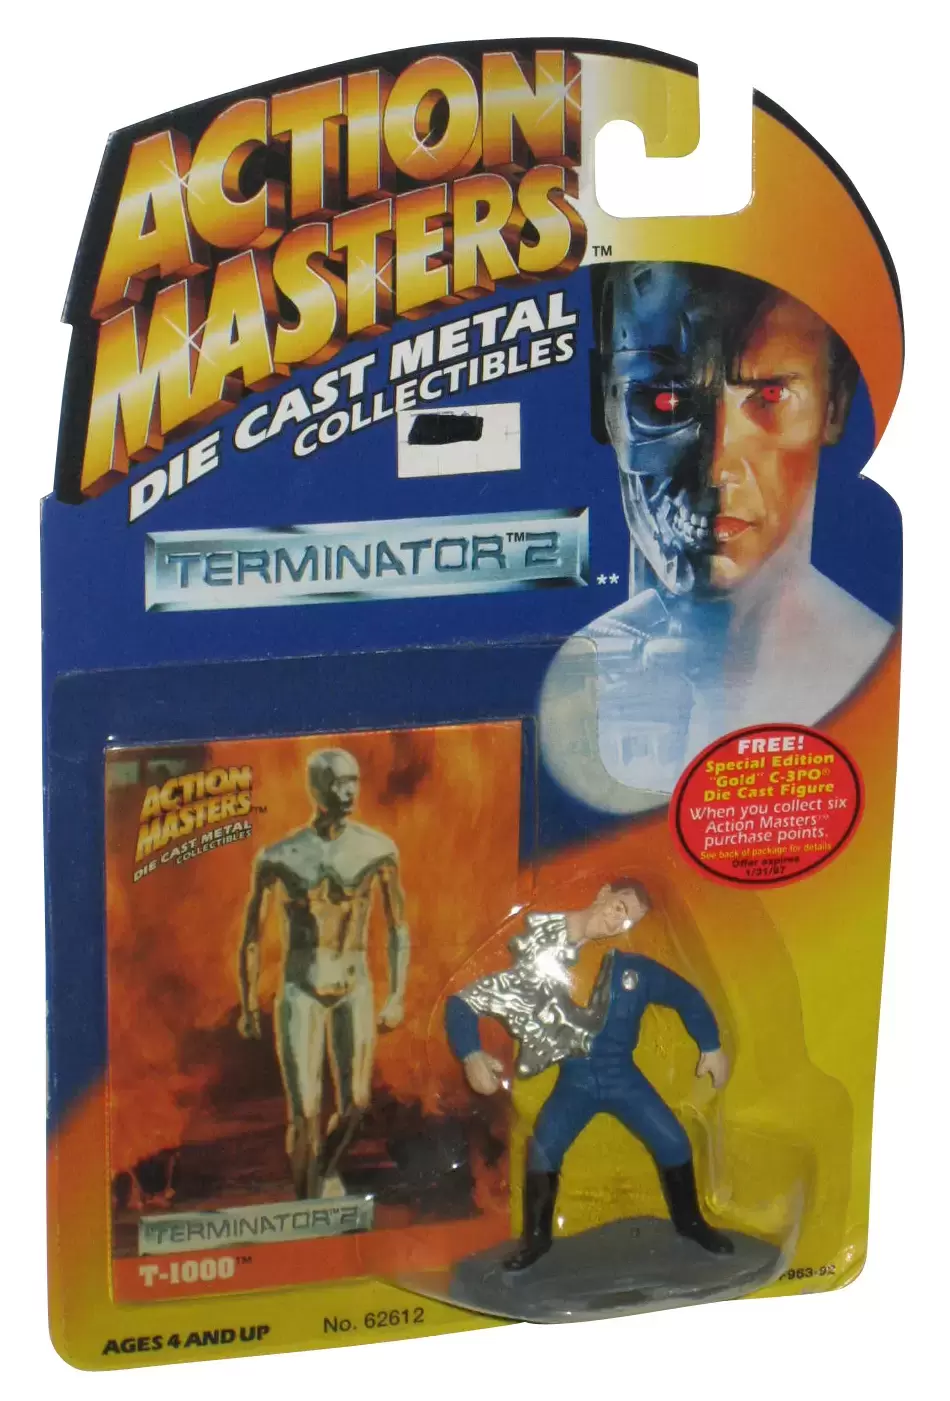 Action Masters - Die Cast Metal Collectibles - Terminator - T-1000